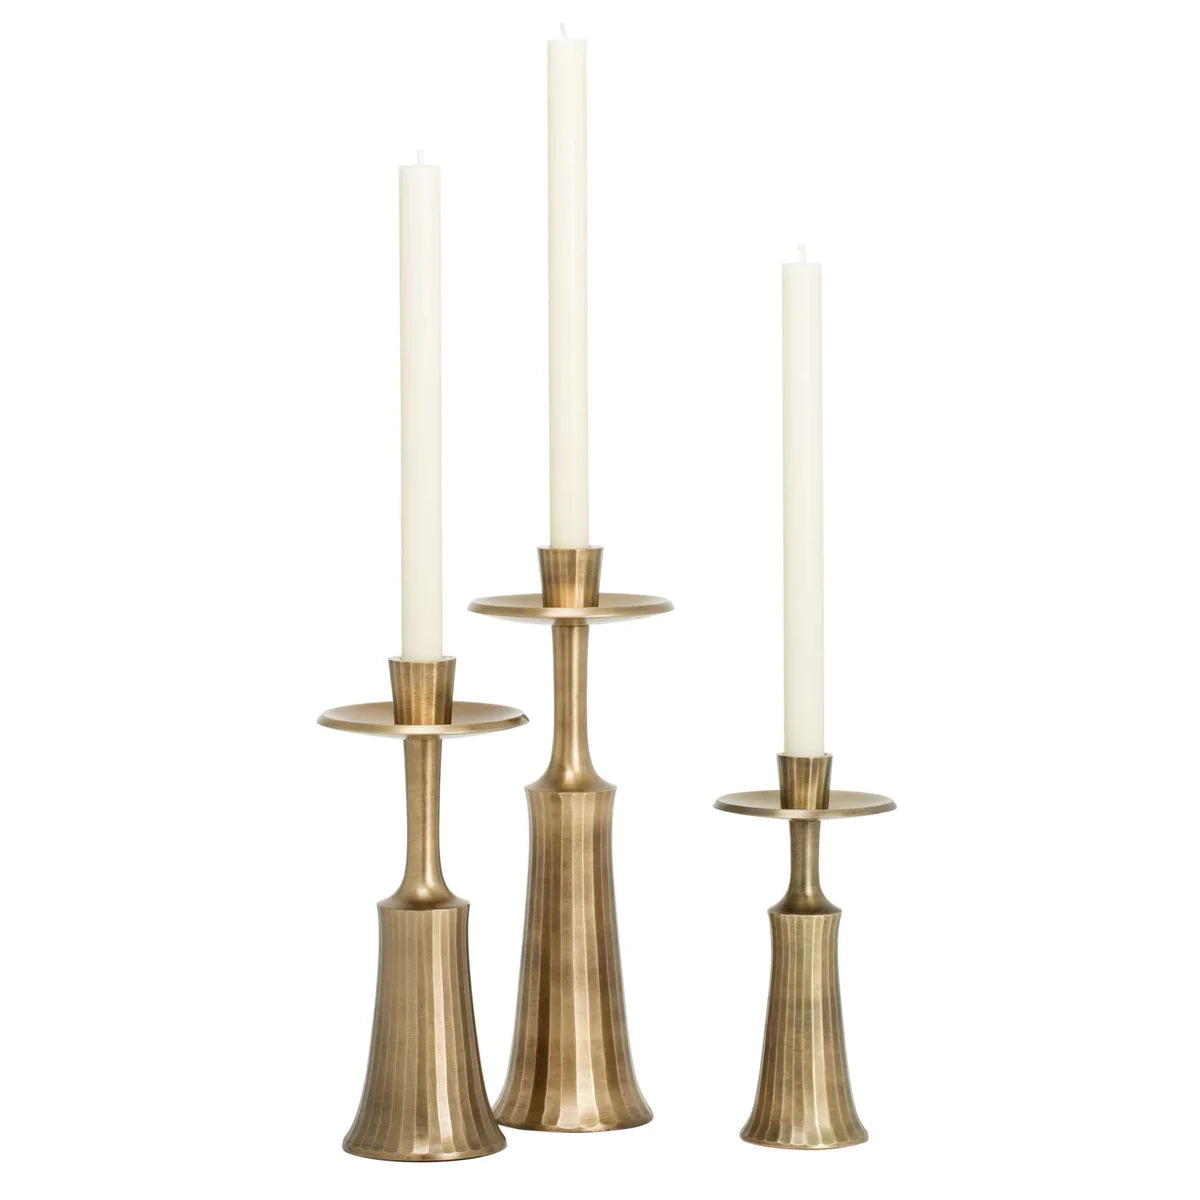 Tomar Antique Brass 3 Piece Ribbed Taper Candle Holder Set